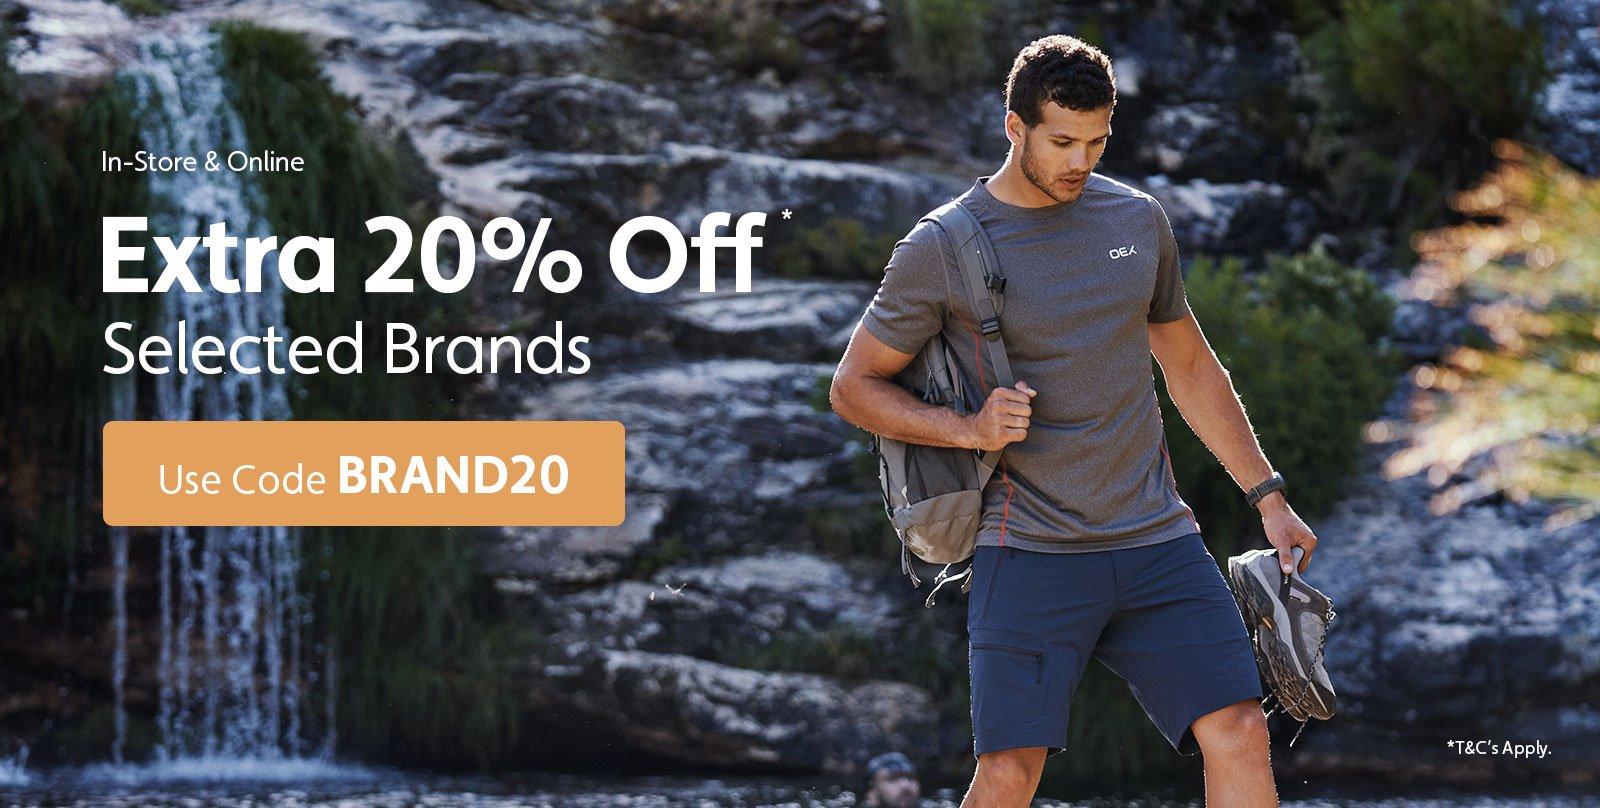 Extra 20% Off* Selected Brands – Use Code BRAND20